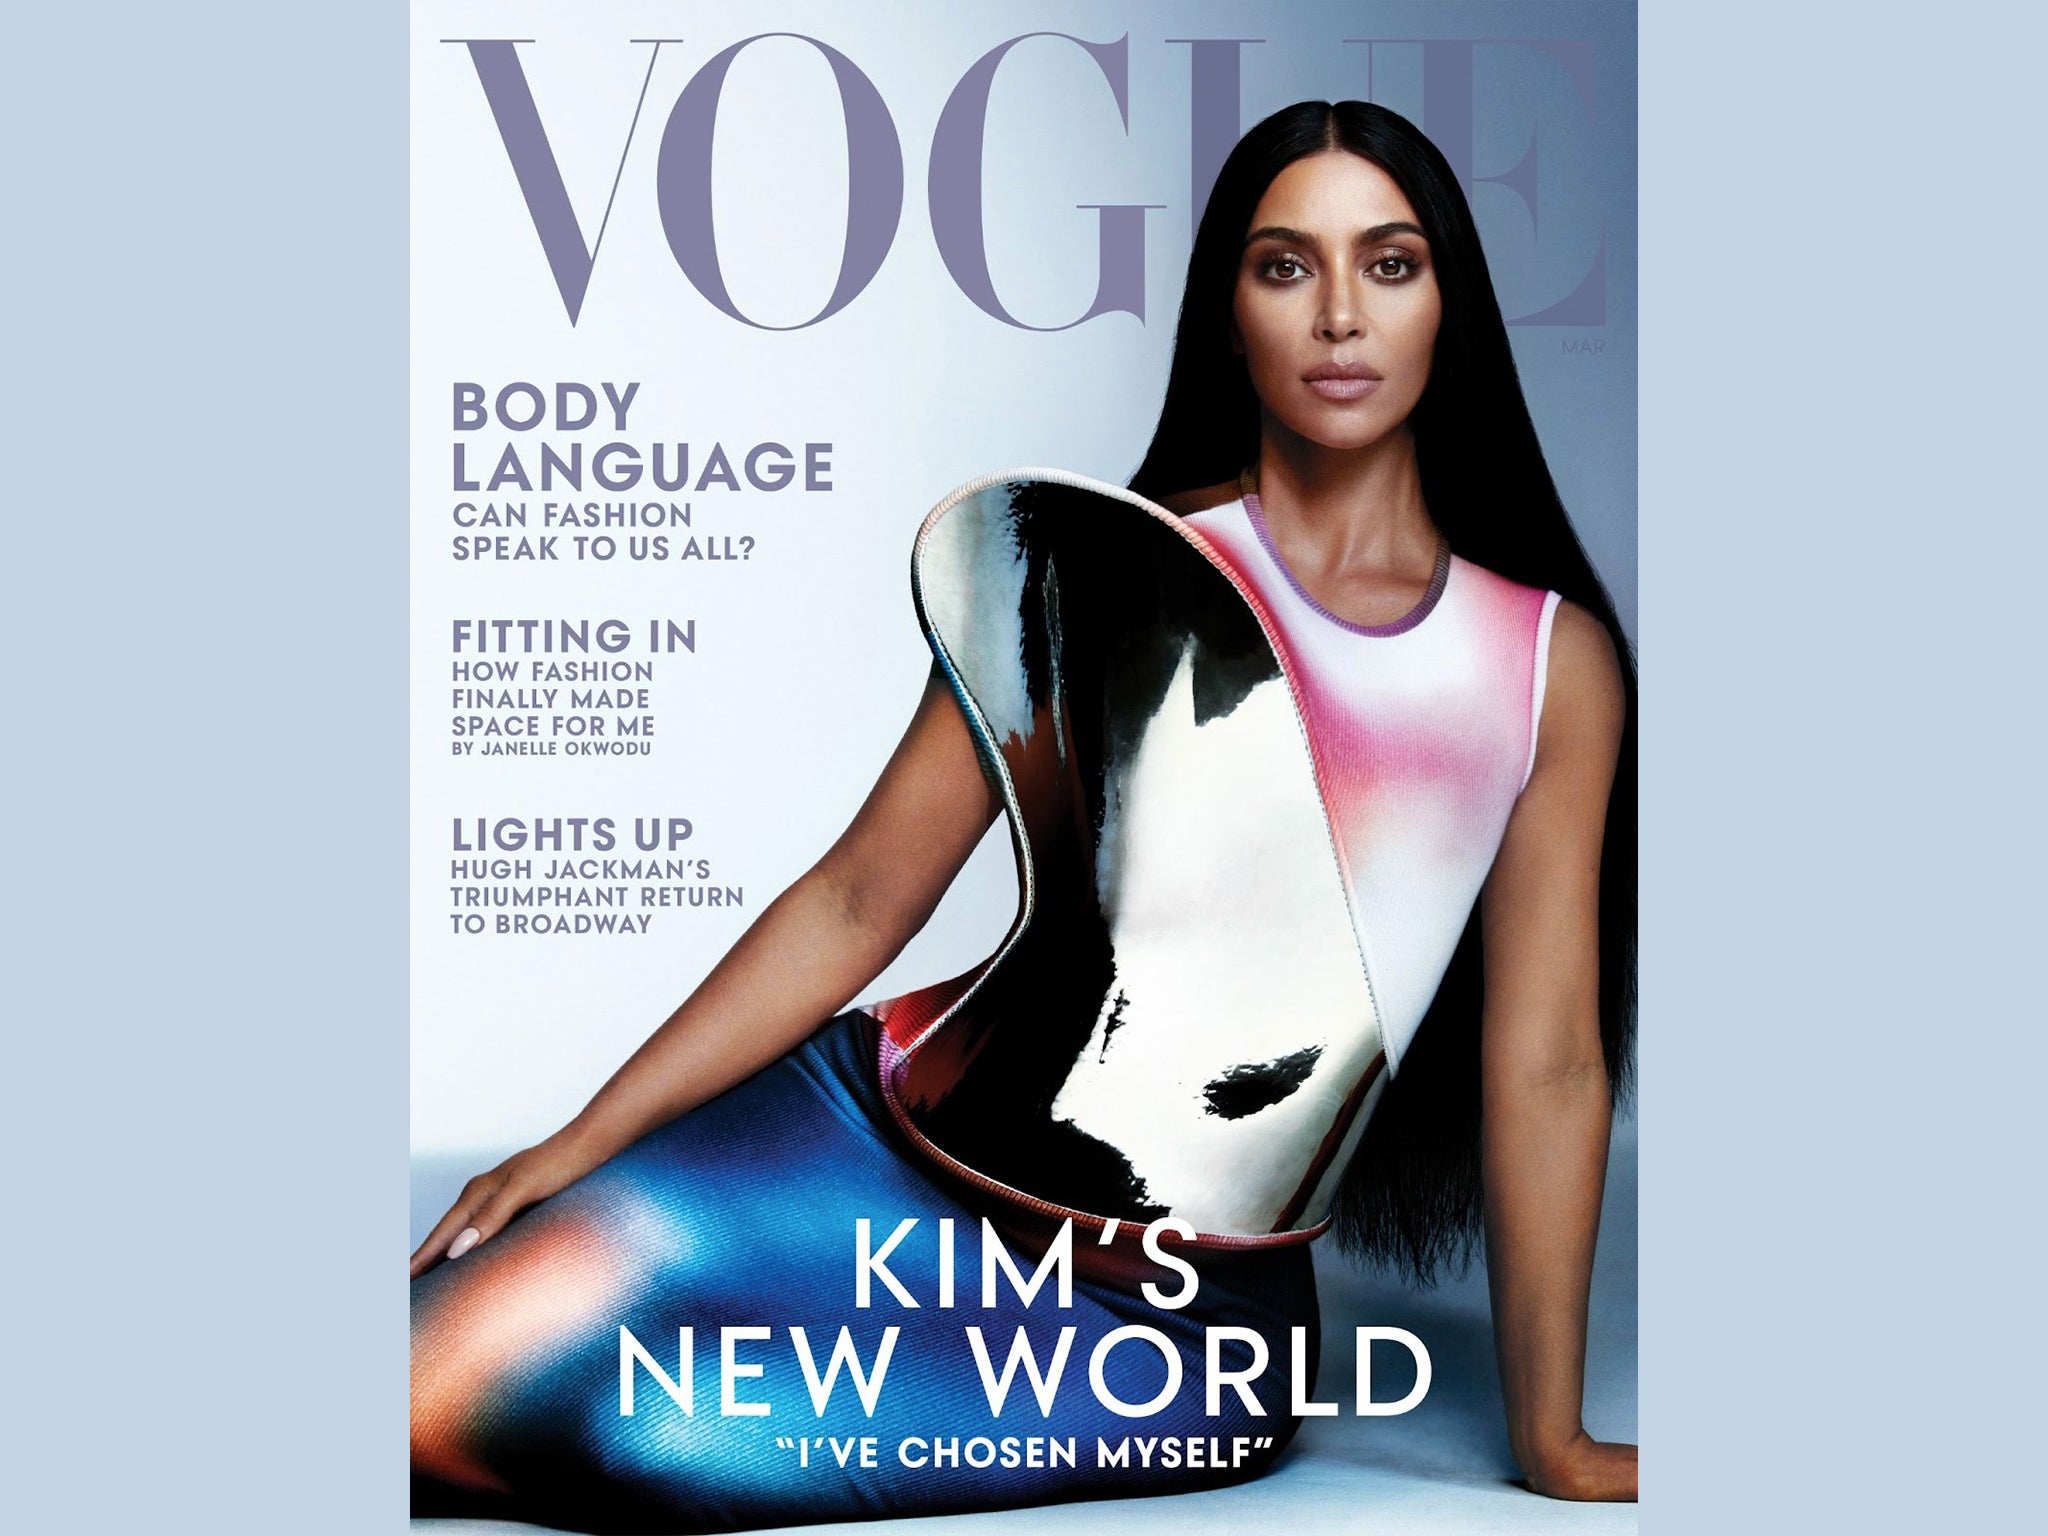 Kim Kardashian covers American Vogue’s March issue